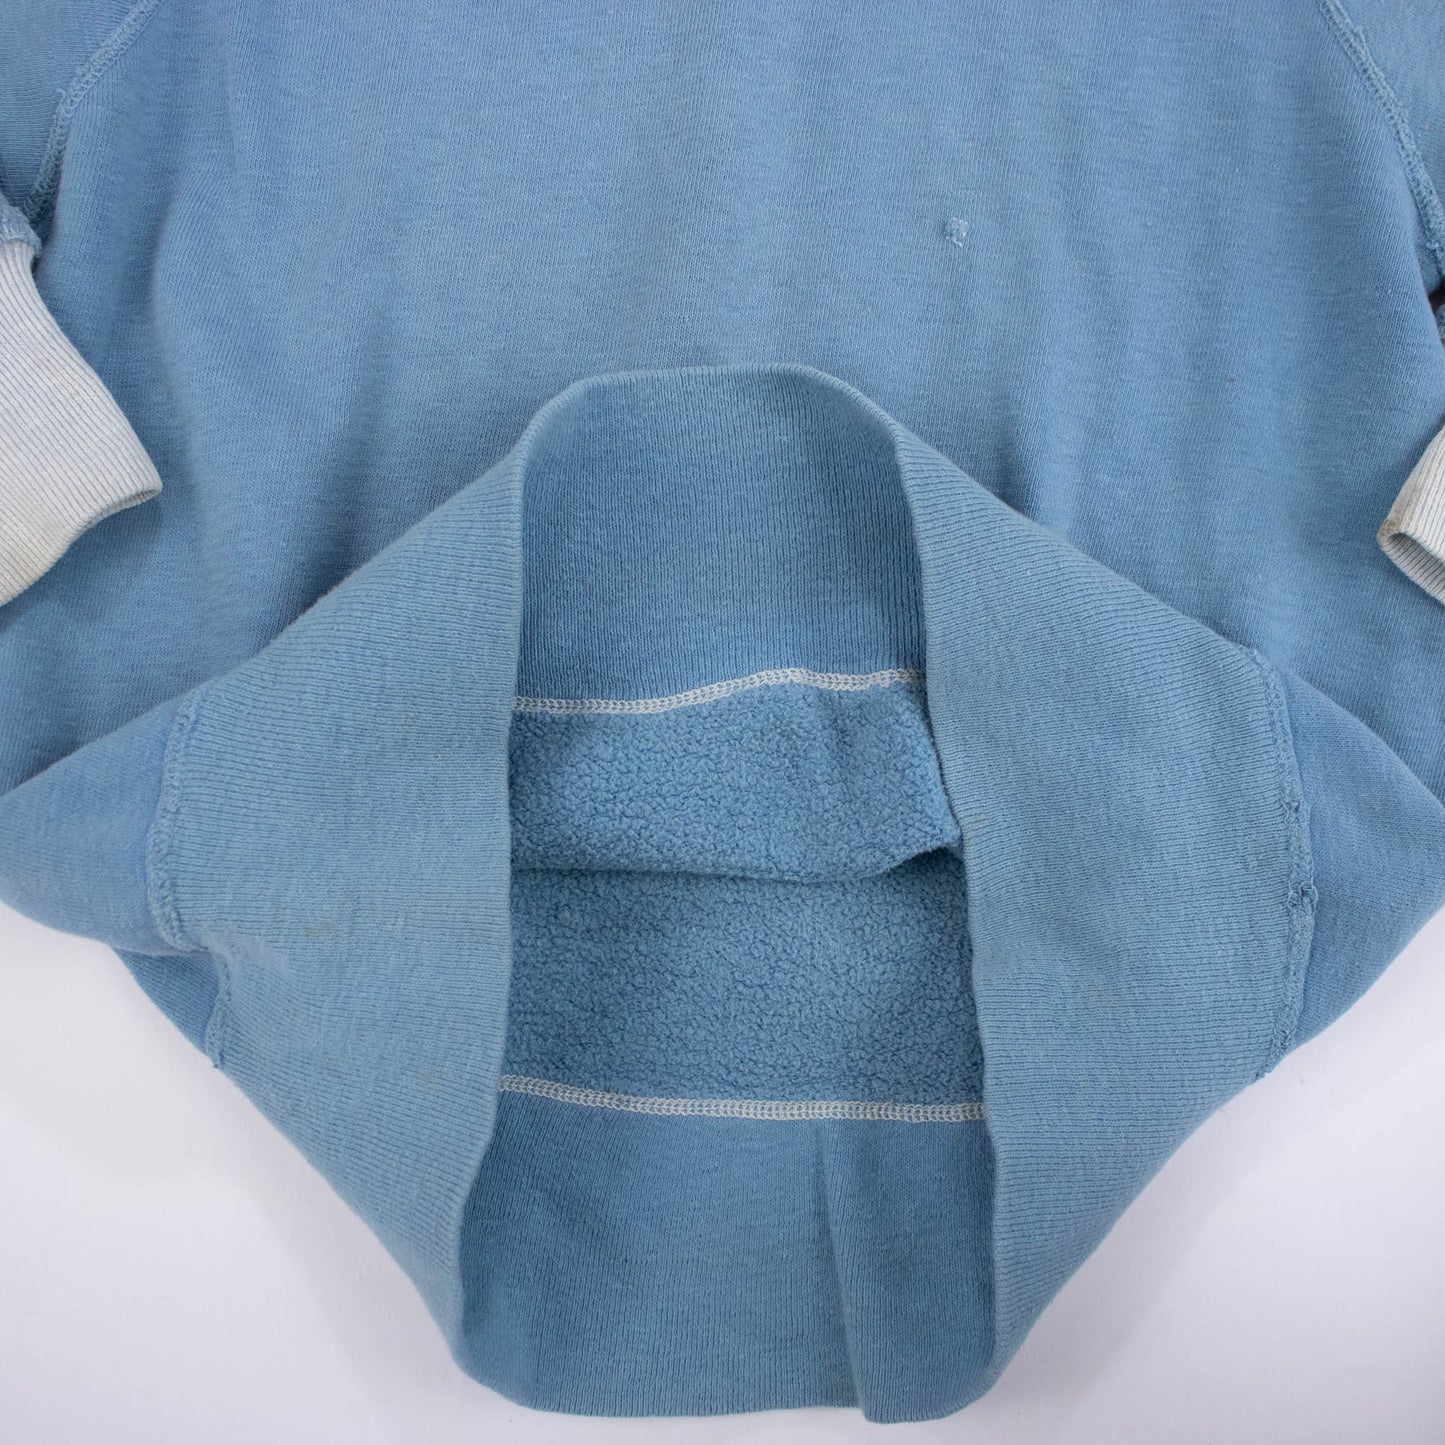 RESERVED FOR ALEX 50's Blue Cotton Remade Sweatshirt with Light Blue Cuffs